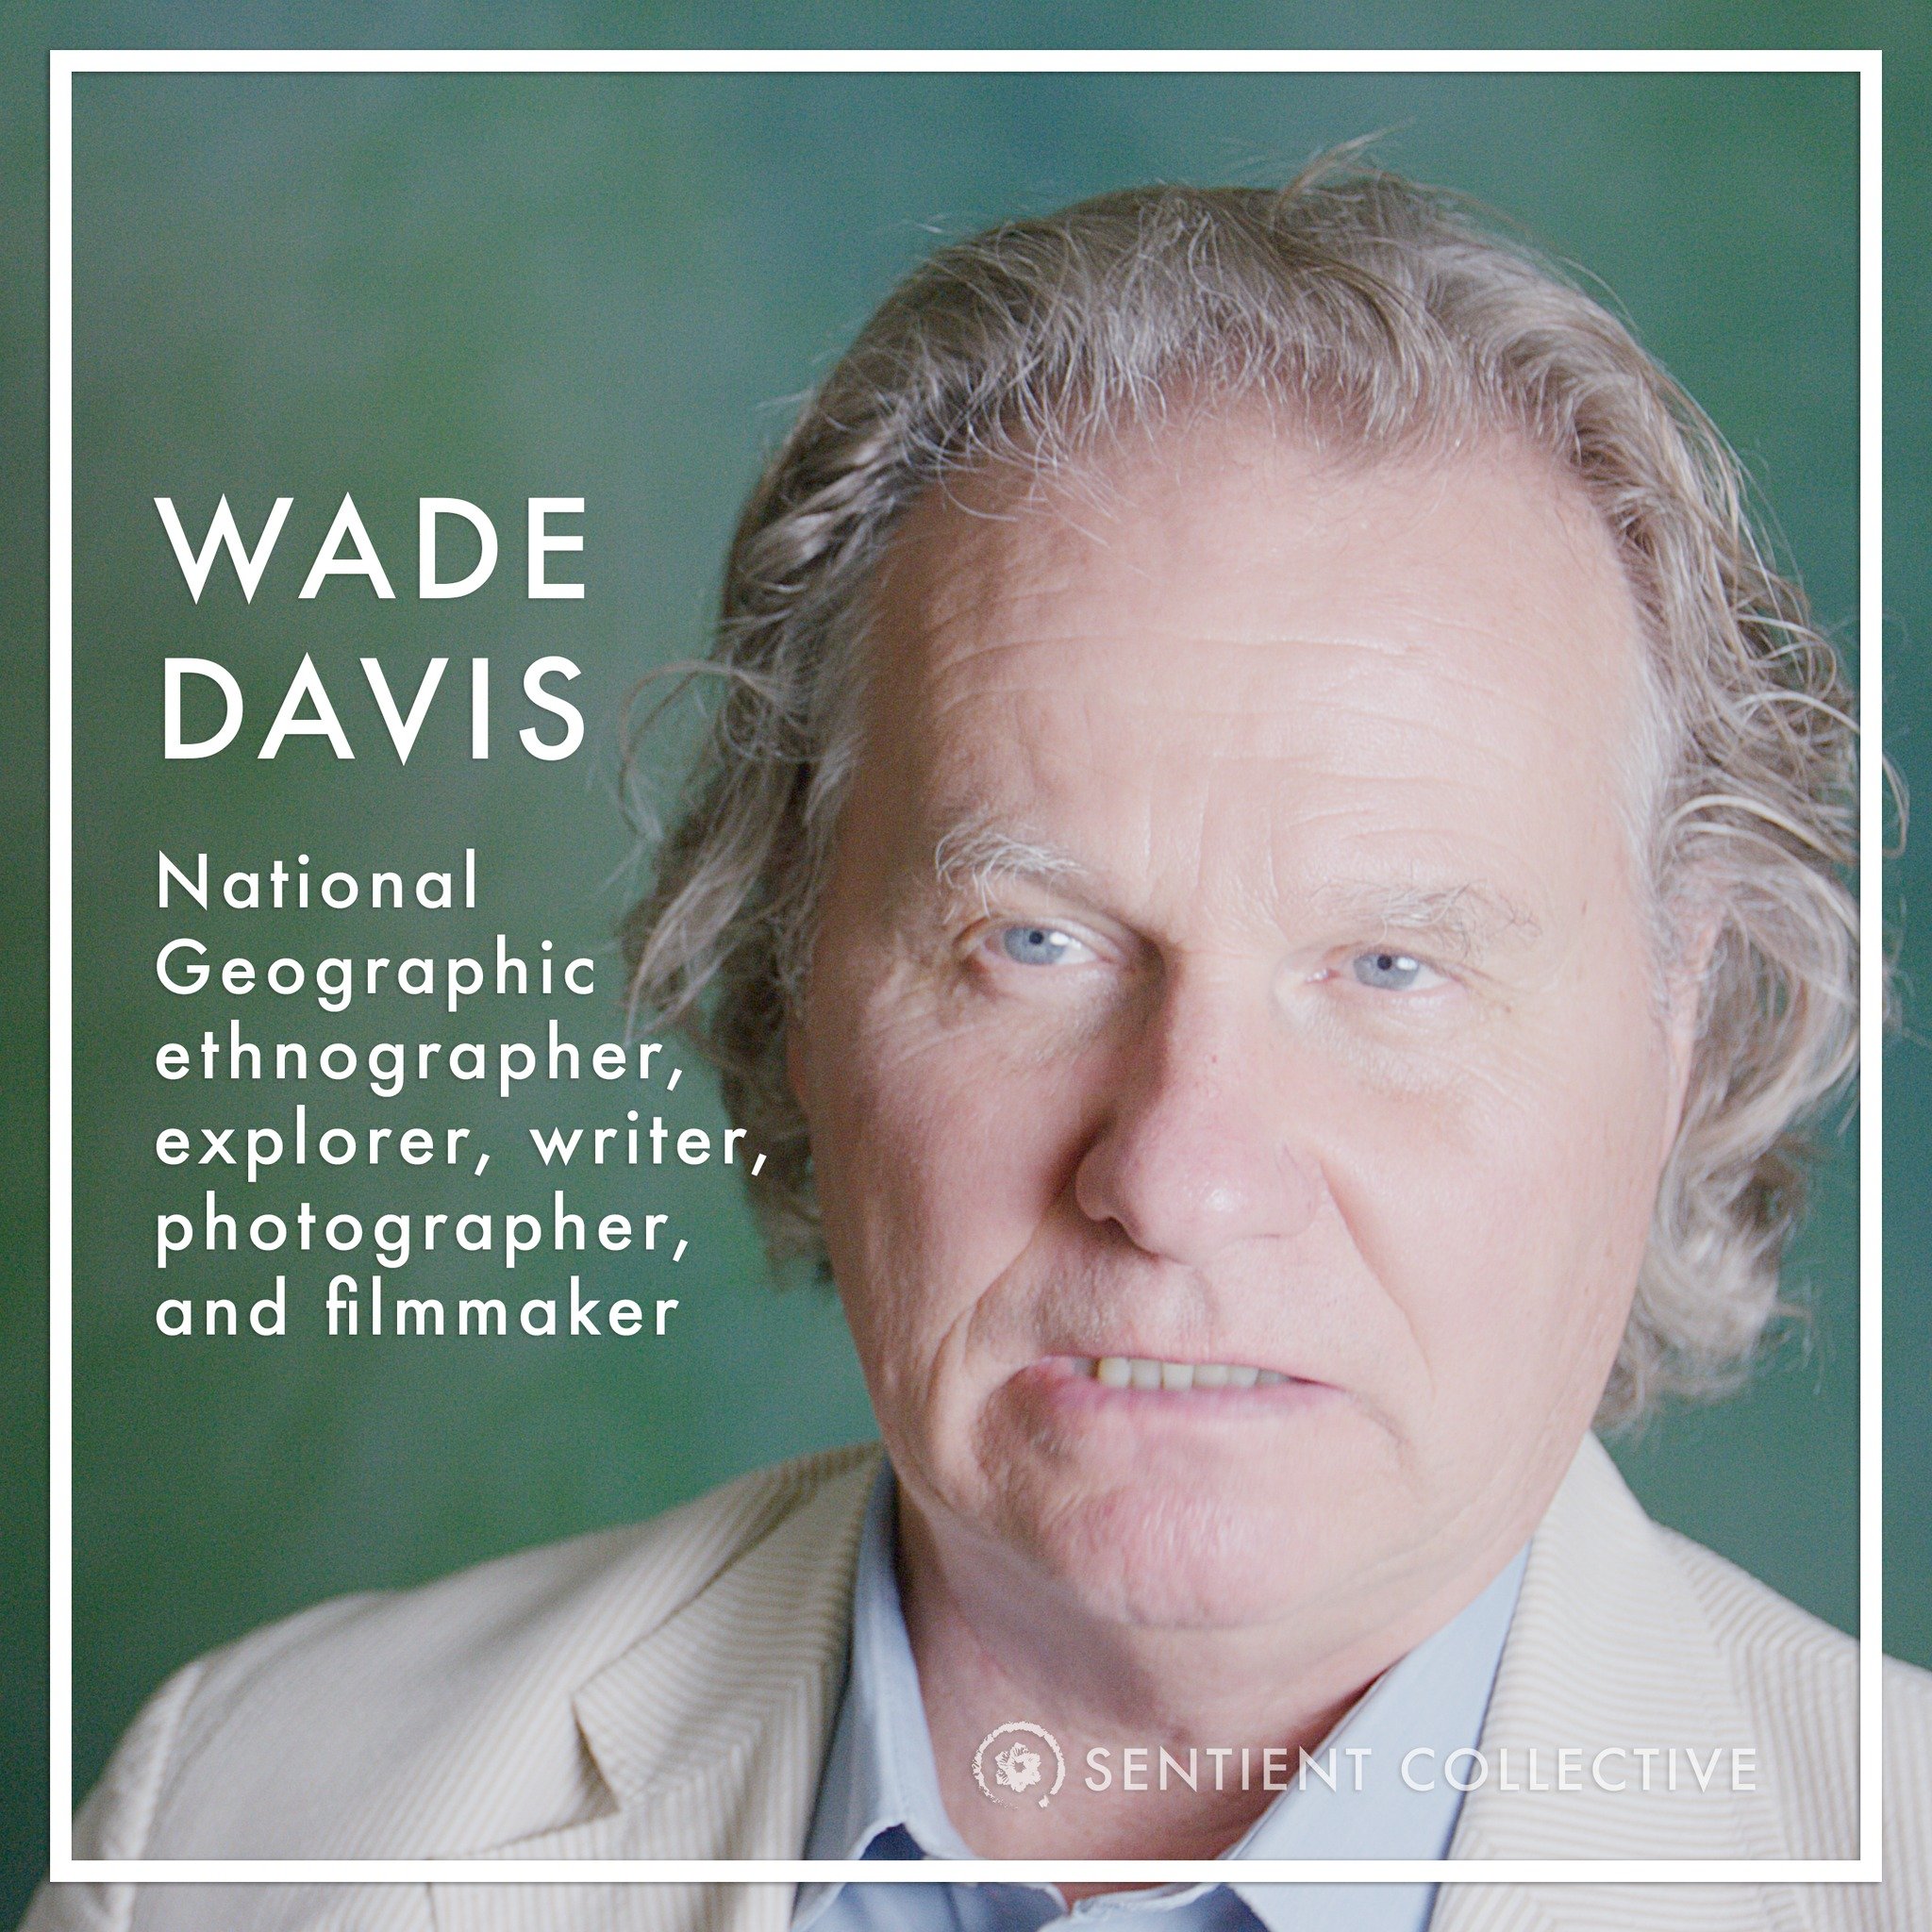 Earth Documentary Film🎬
🆂🅴🅽🆃🅸🅴🅽🆃
.
Cast Intro:
𝗪𝗮𝗱𝗲 𝗗𝗮𝘃𝗶𝘀 (@wadedavisofficial)
National Geographic #explorer, #anthropologist, #ethnographer, writer, photographer, and filmmaker
.
Wade is known for his extensive exploration of #indi